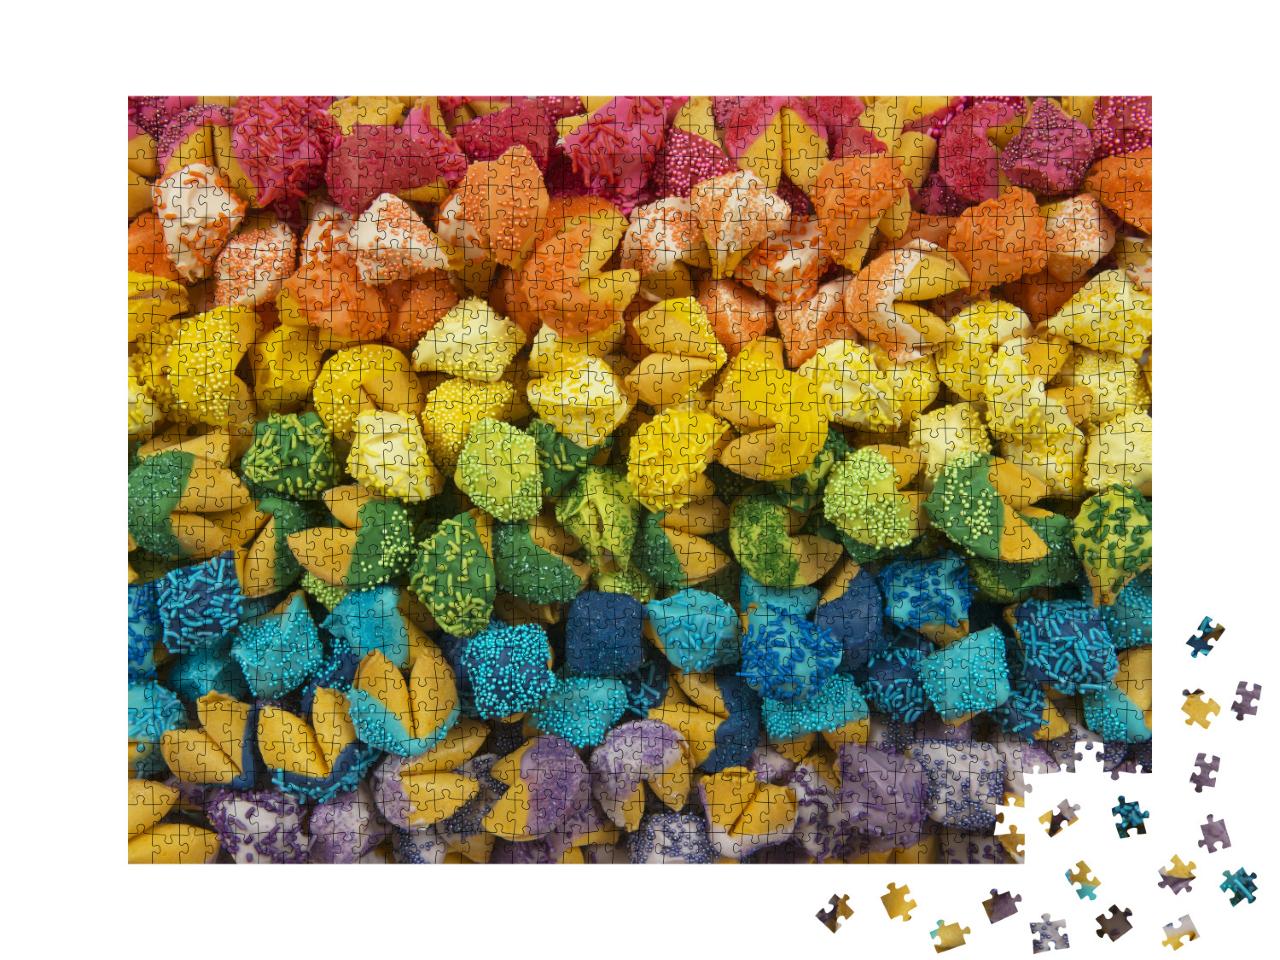 Rainbow Fortune Cookies Photo Collage Jigsaw Puzzle with 1000 pieces